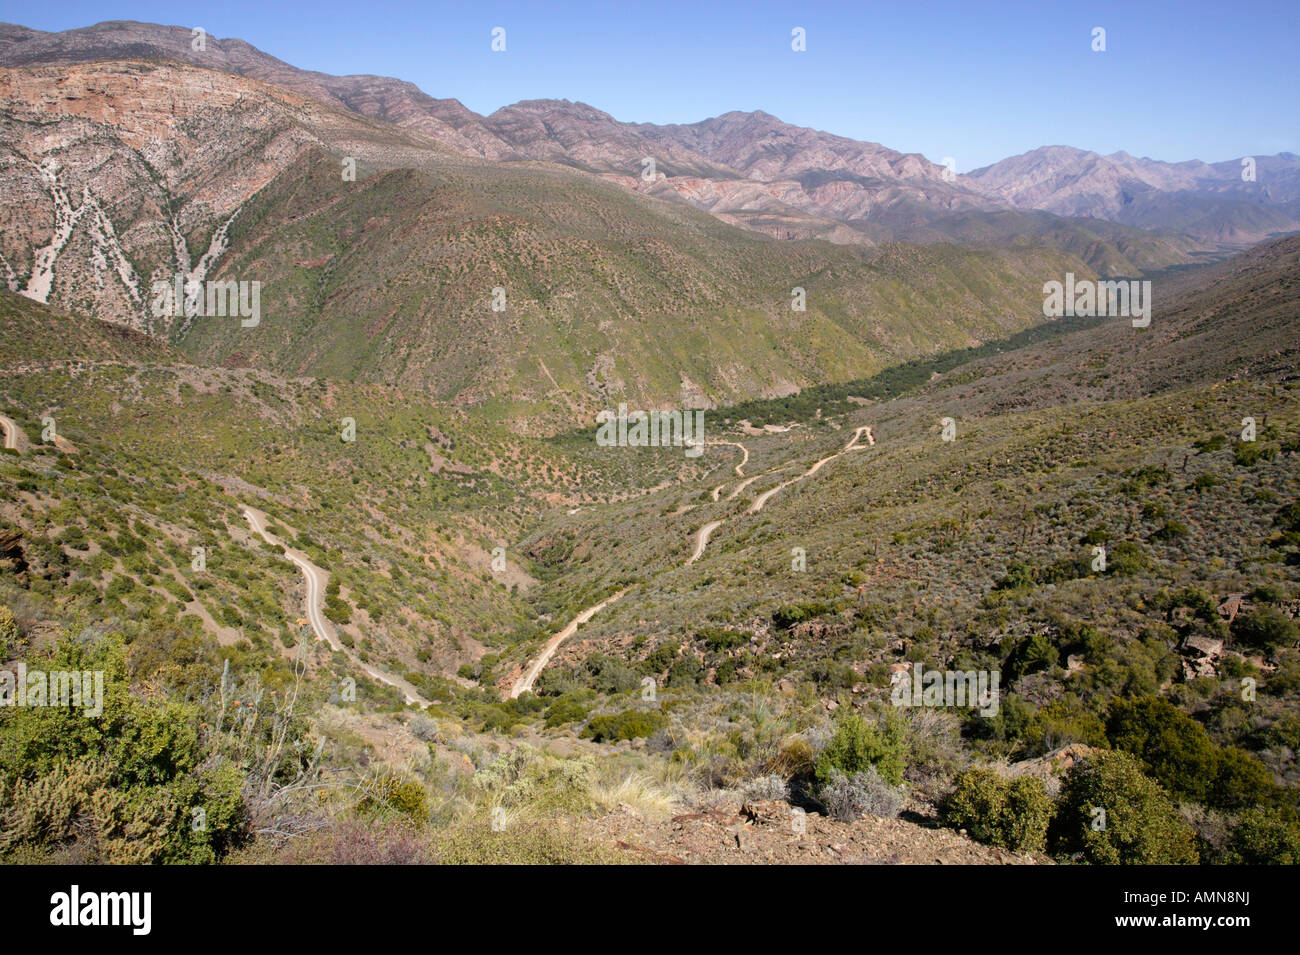 A scenic view of the hairpin bends on the road leading down into the Gamkaskloof or Die Hel from Swartberg Pass Stock Photo